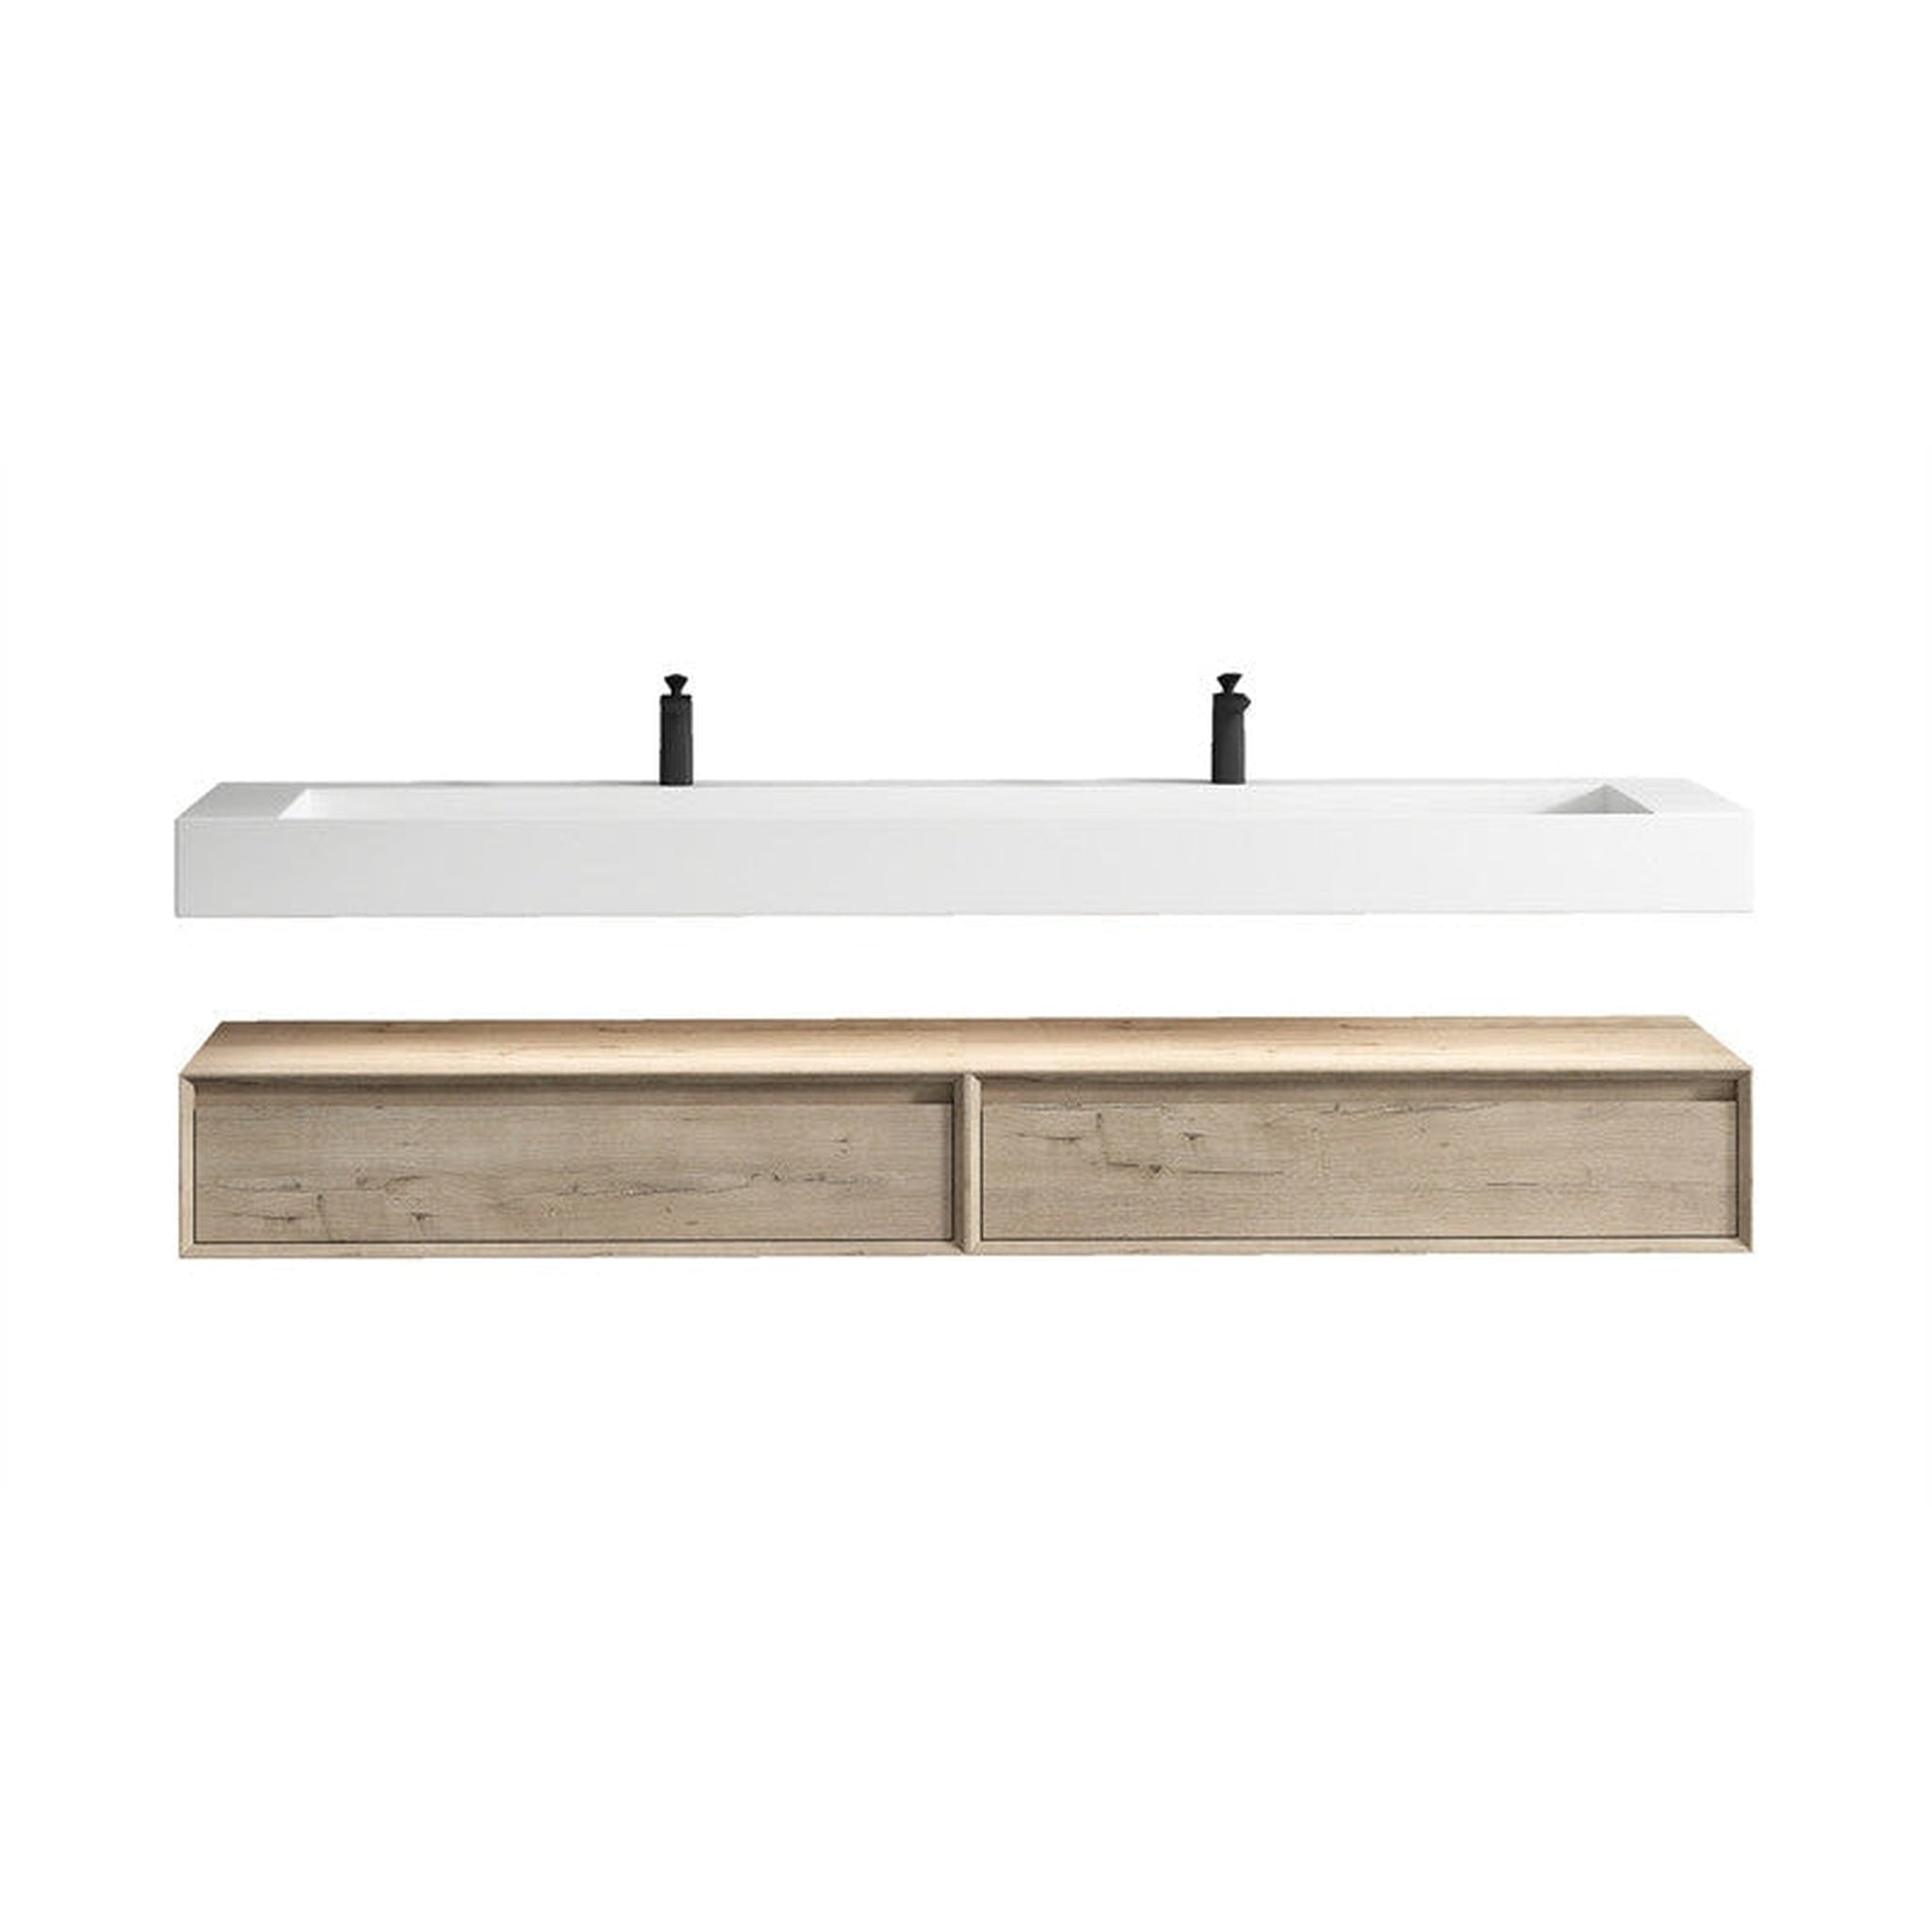 Moreno Bath Alysa 84 Light Oak Floating Vanity with Double Faucet Holes and Reinforced White Acrylic Sink